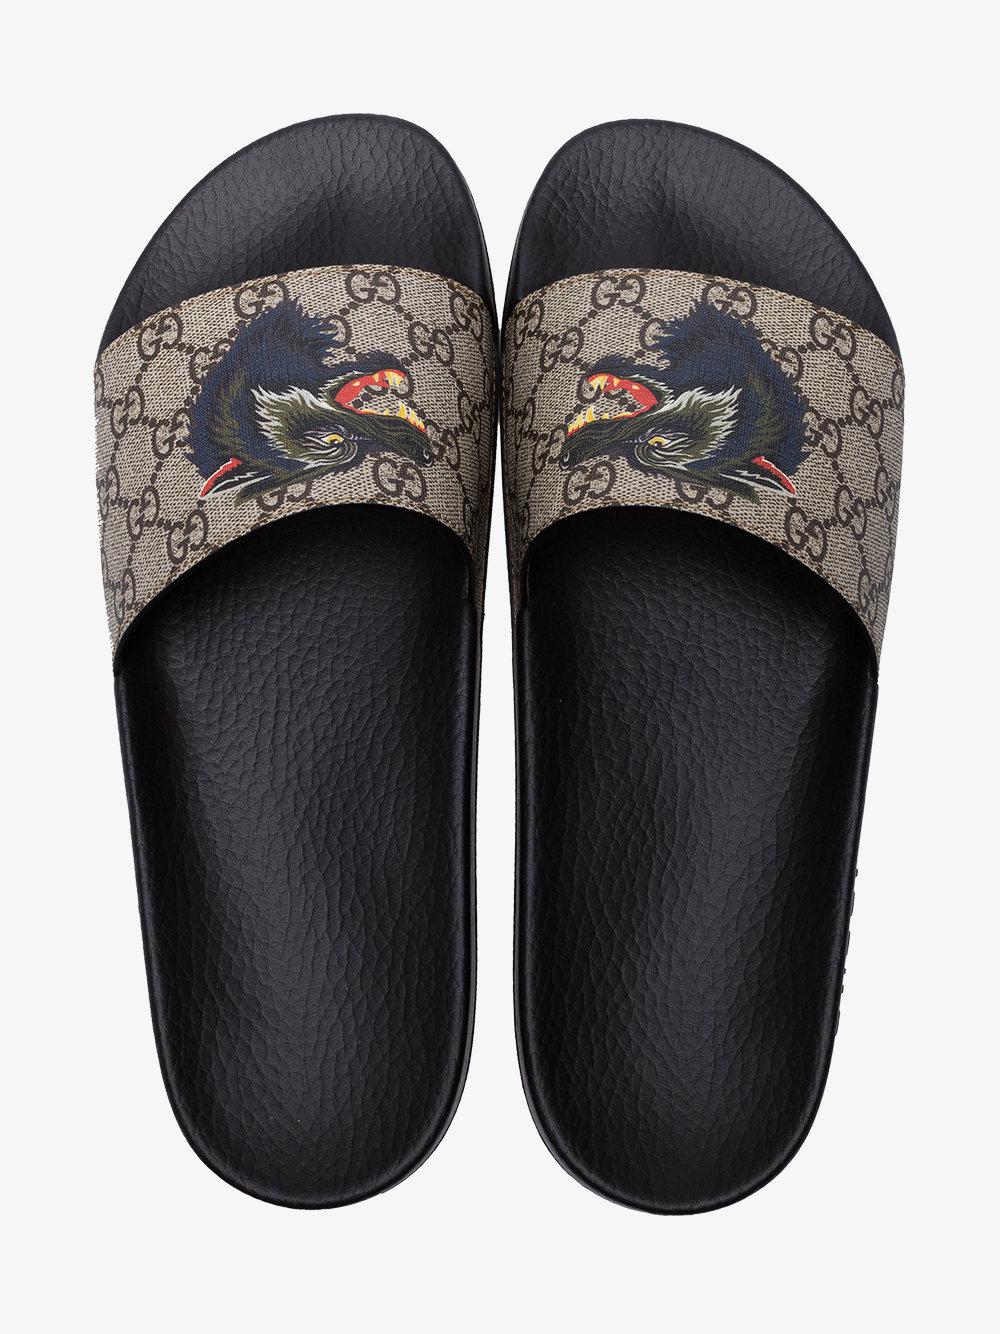 Gucci Leather Wolf-print Gg Supreme Slides for Men - Lyst